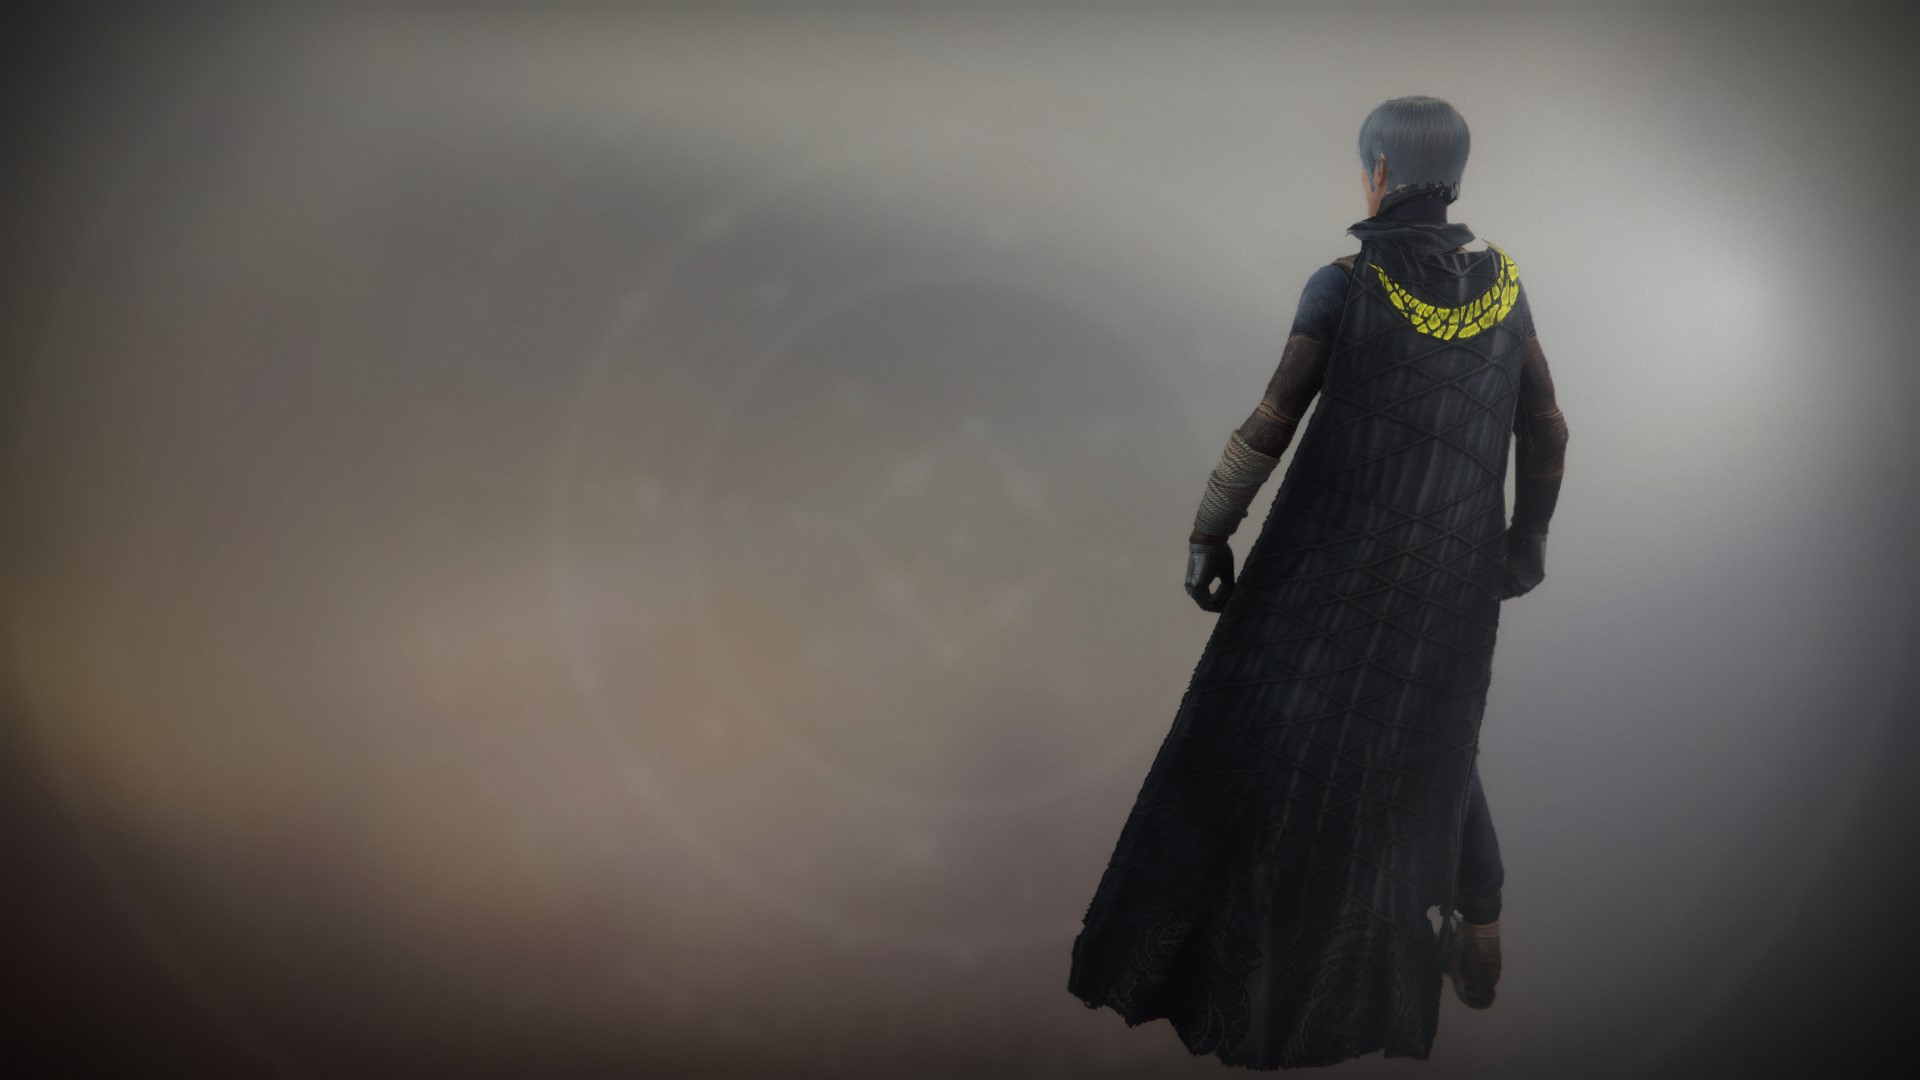 An in-game render of the Outlawed Sentry Cloak.